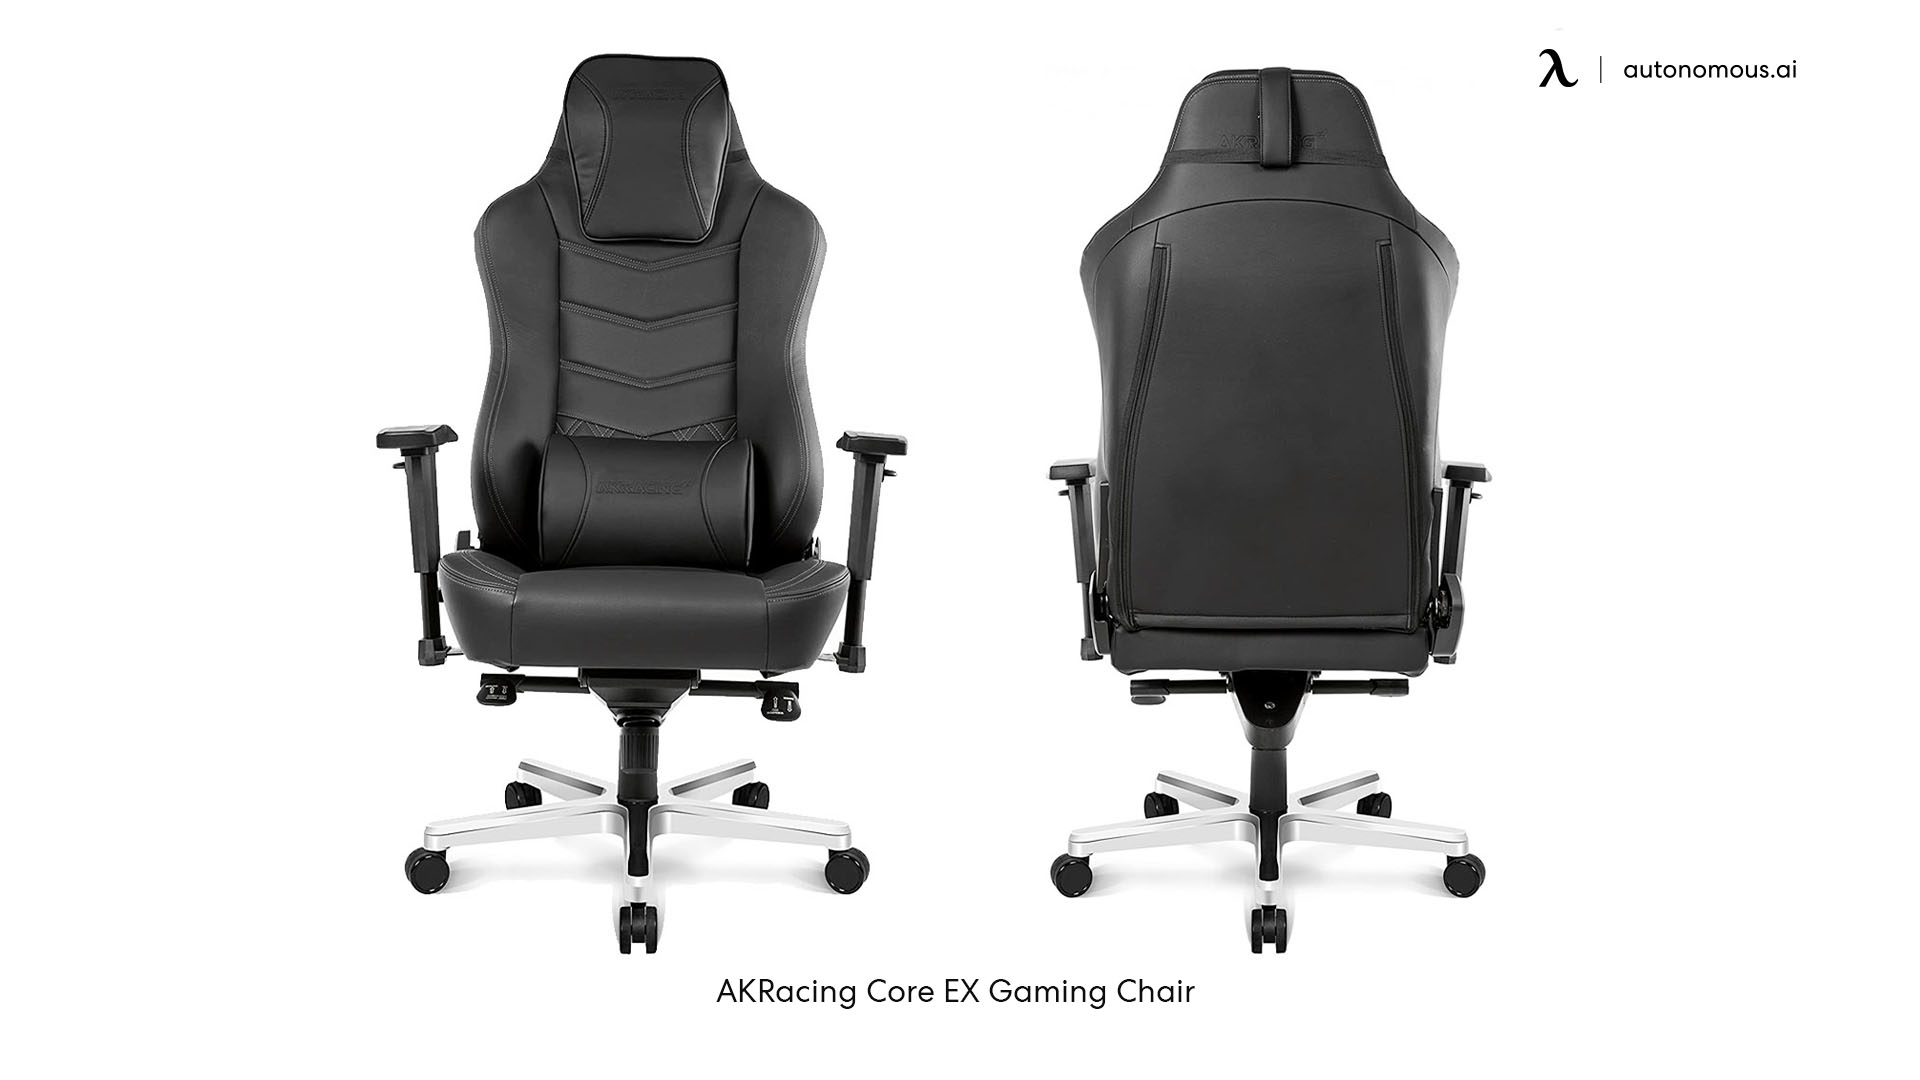 AKRacing Core EX Gaming Chair